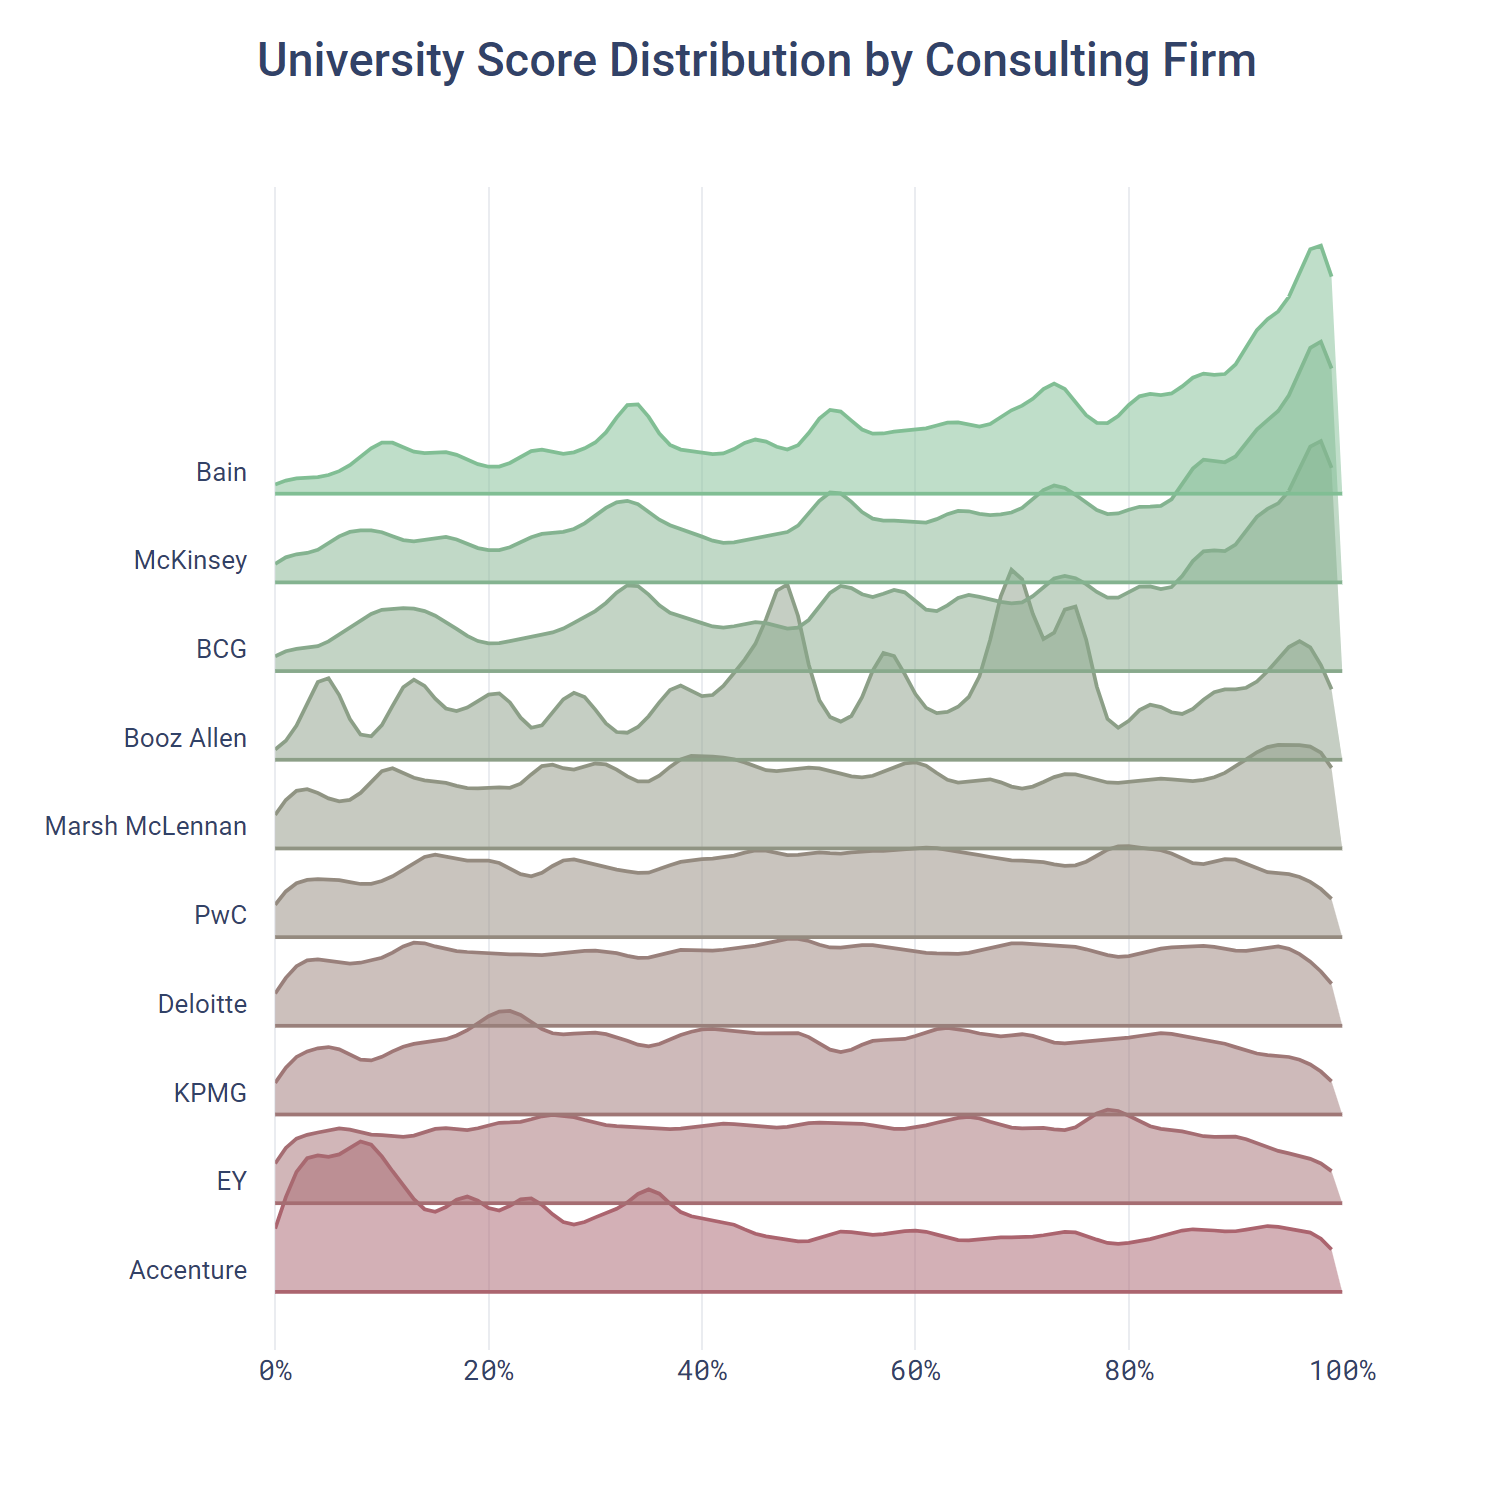 University Score Distribution by Consulting Firm